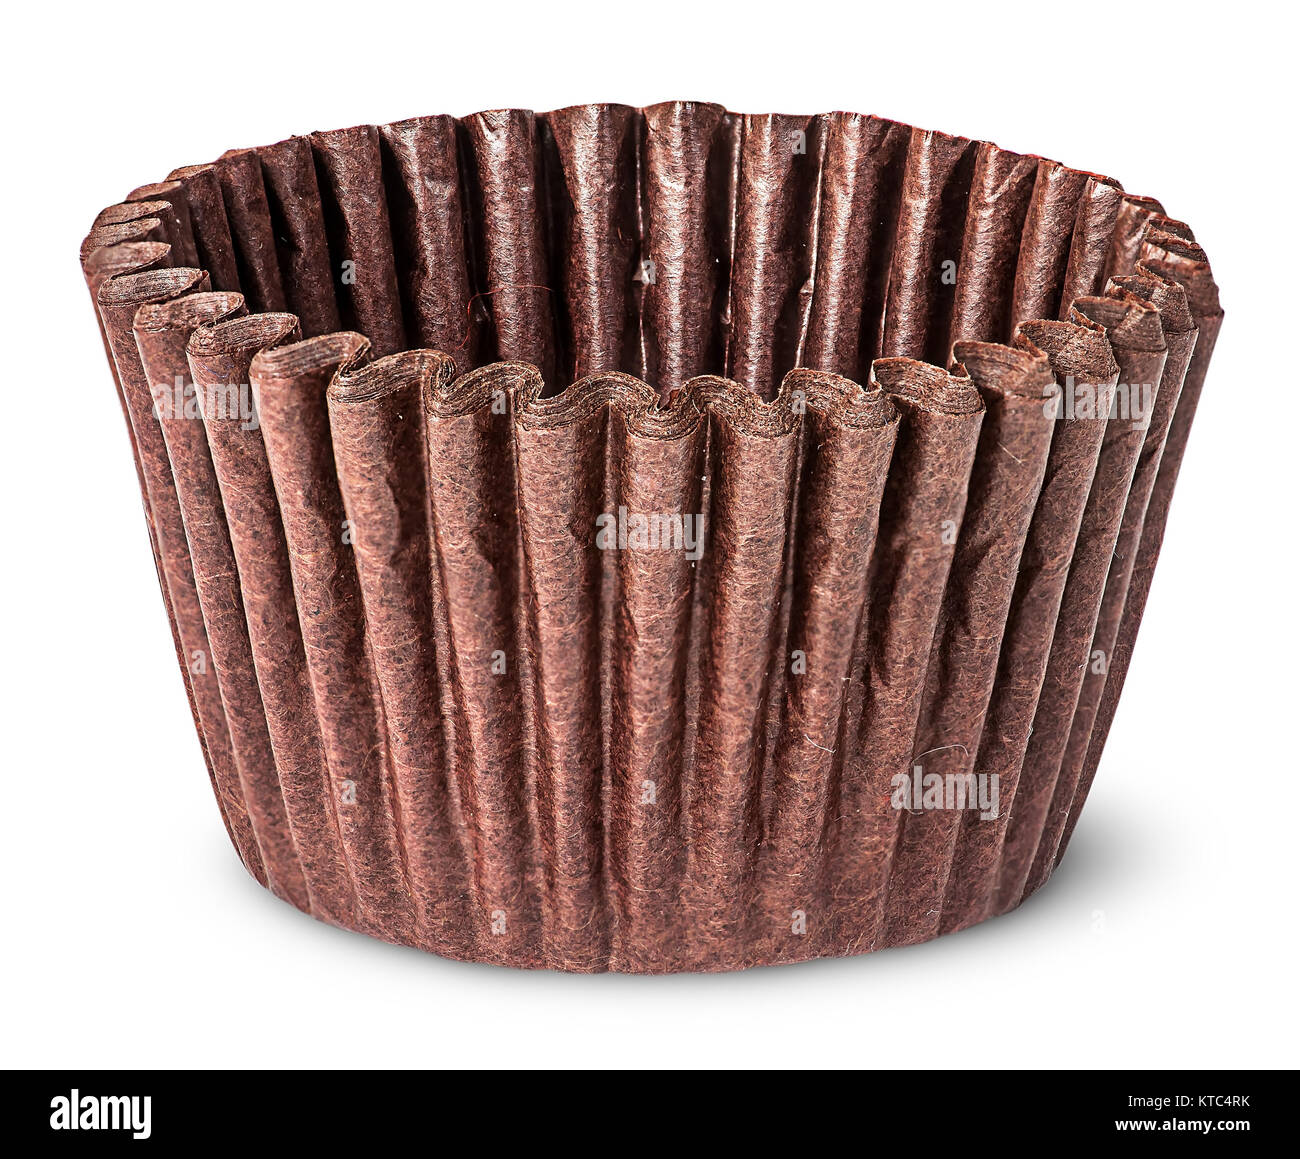 Stack of brown paper cups for baking muffins Stock Photo